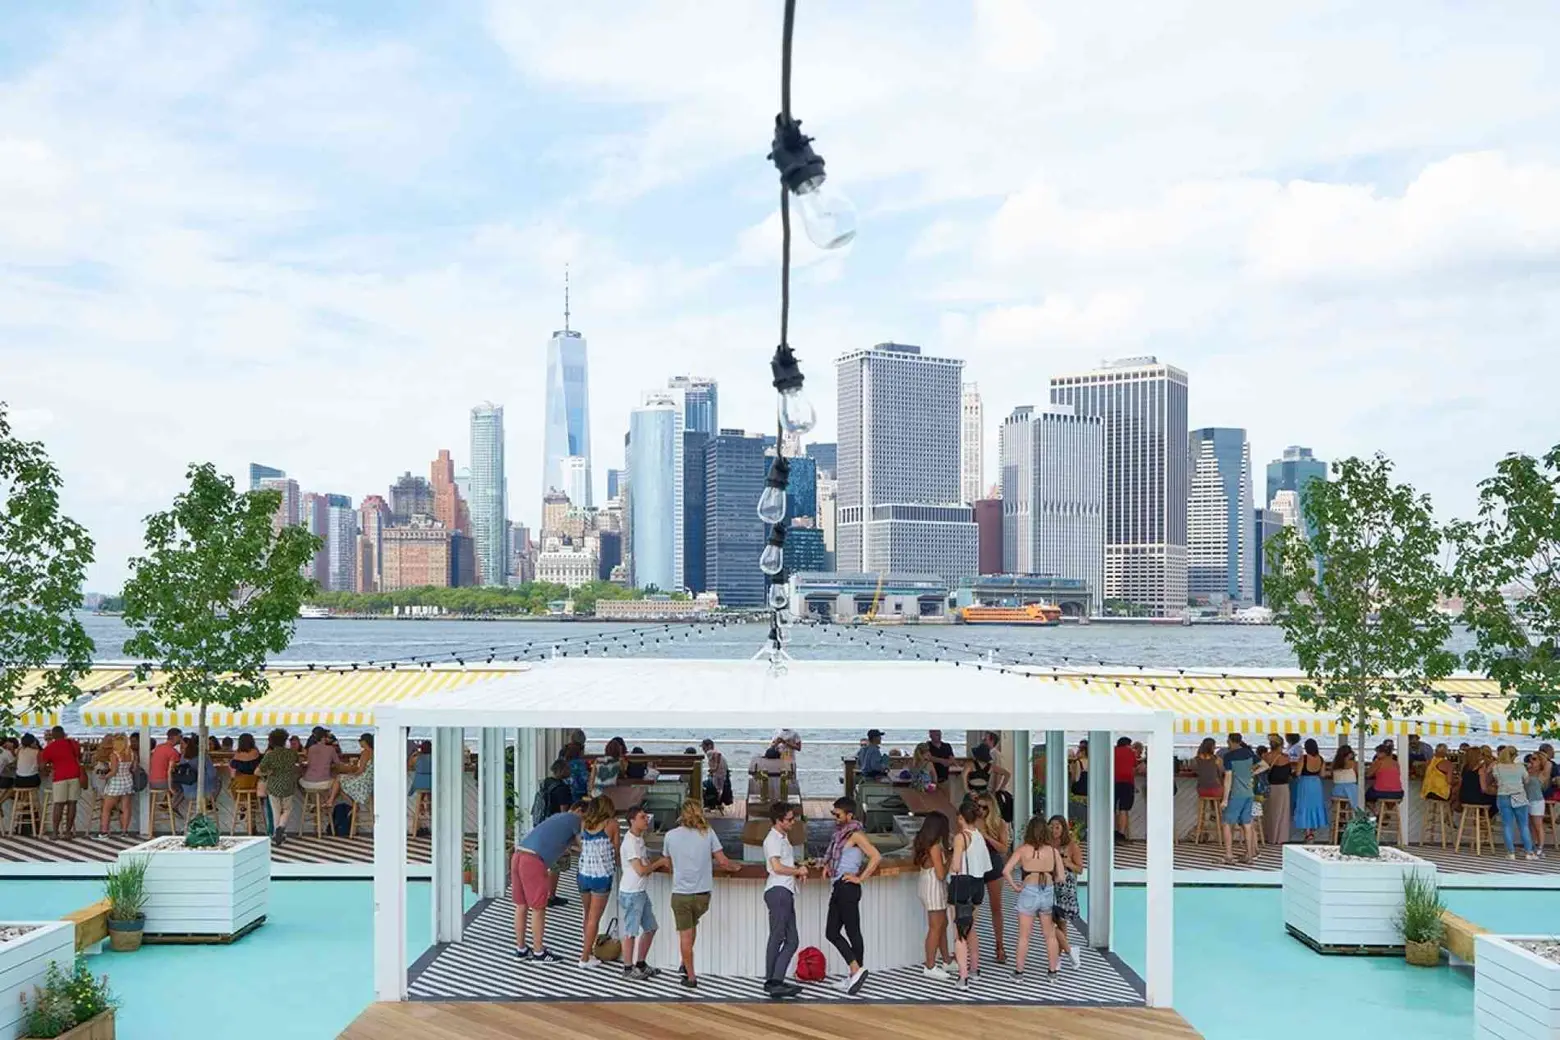 Governors Island is now open late all weekend